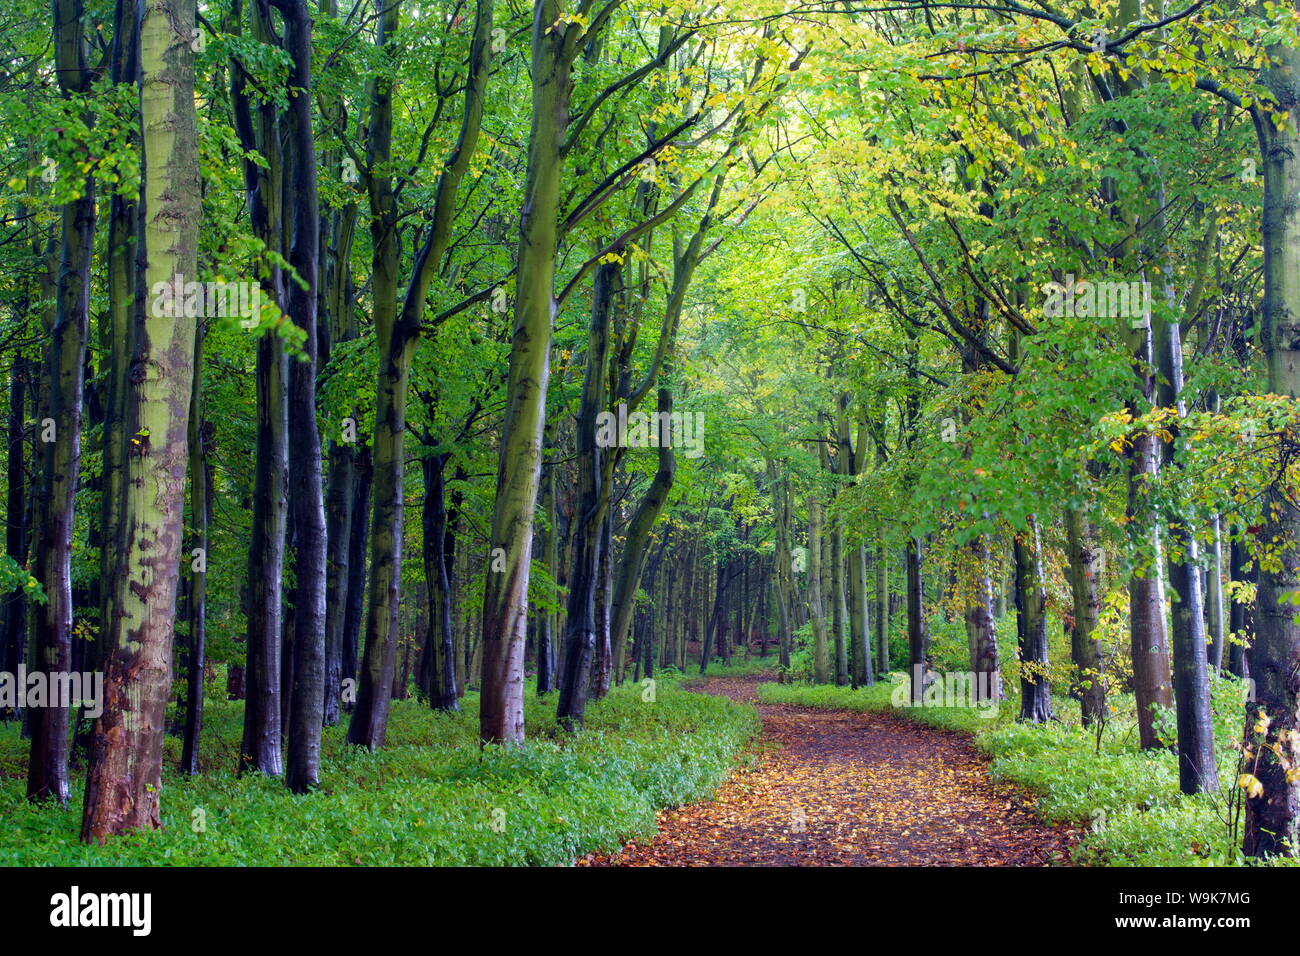 Beech woodland in spring with path snaking between the trees, Alnwick Garden, Alnwick, Northumberland, England, United Kingdom Stock Photo